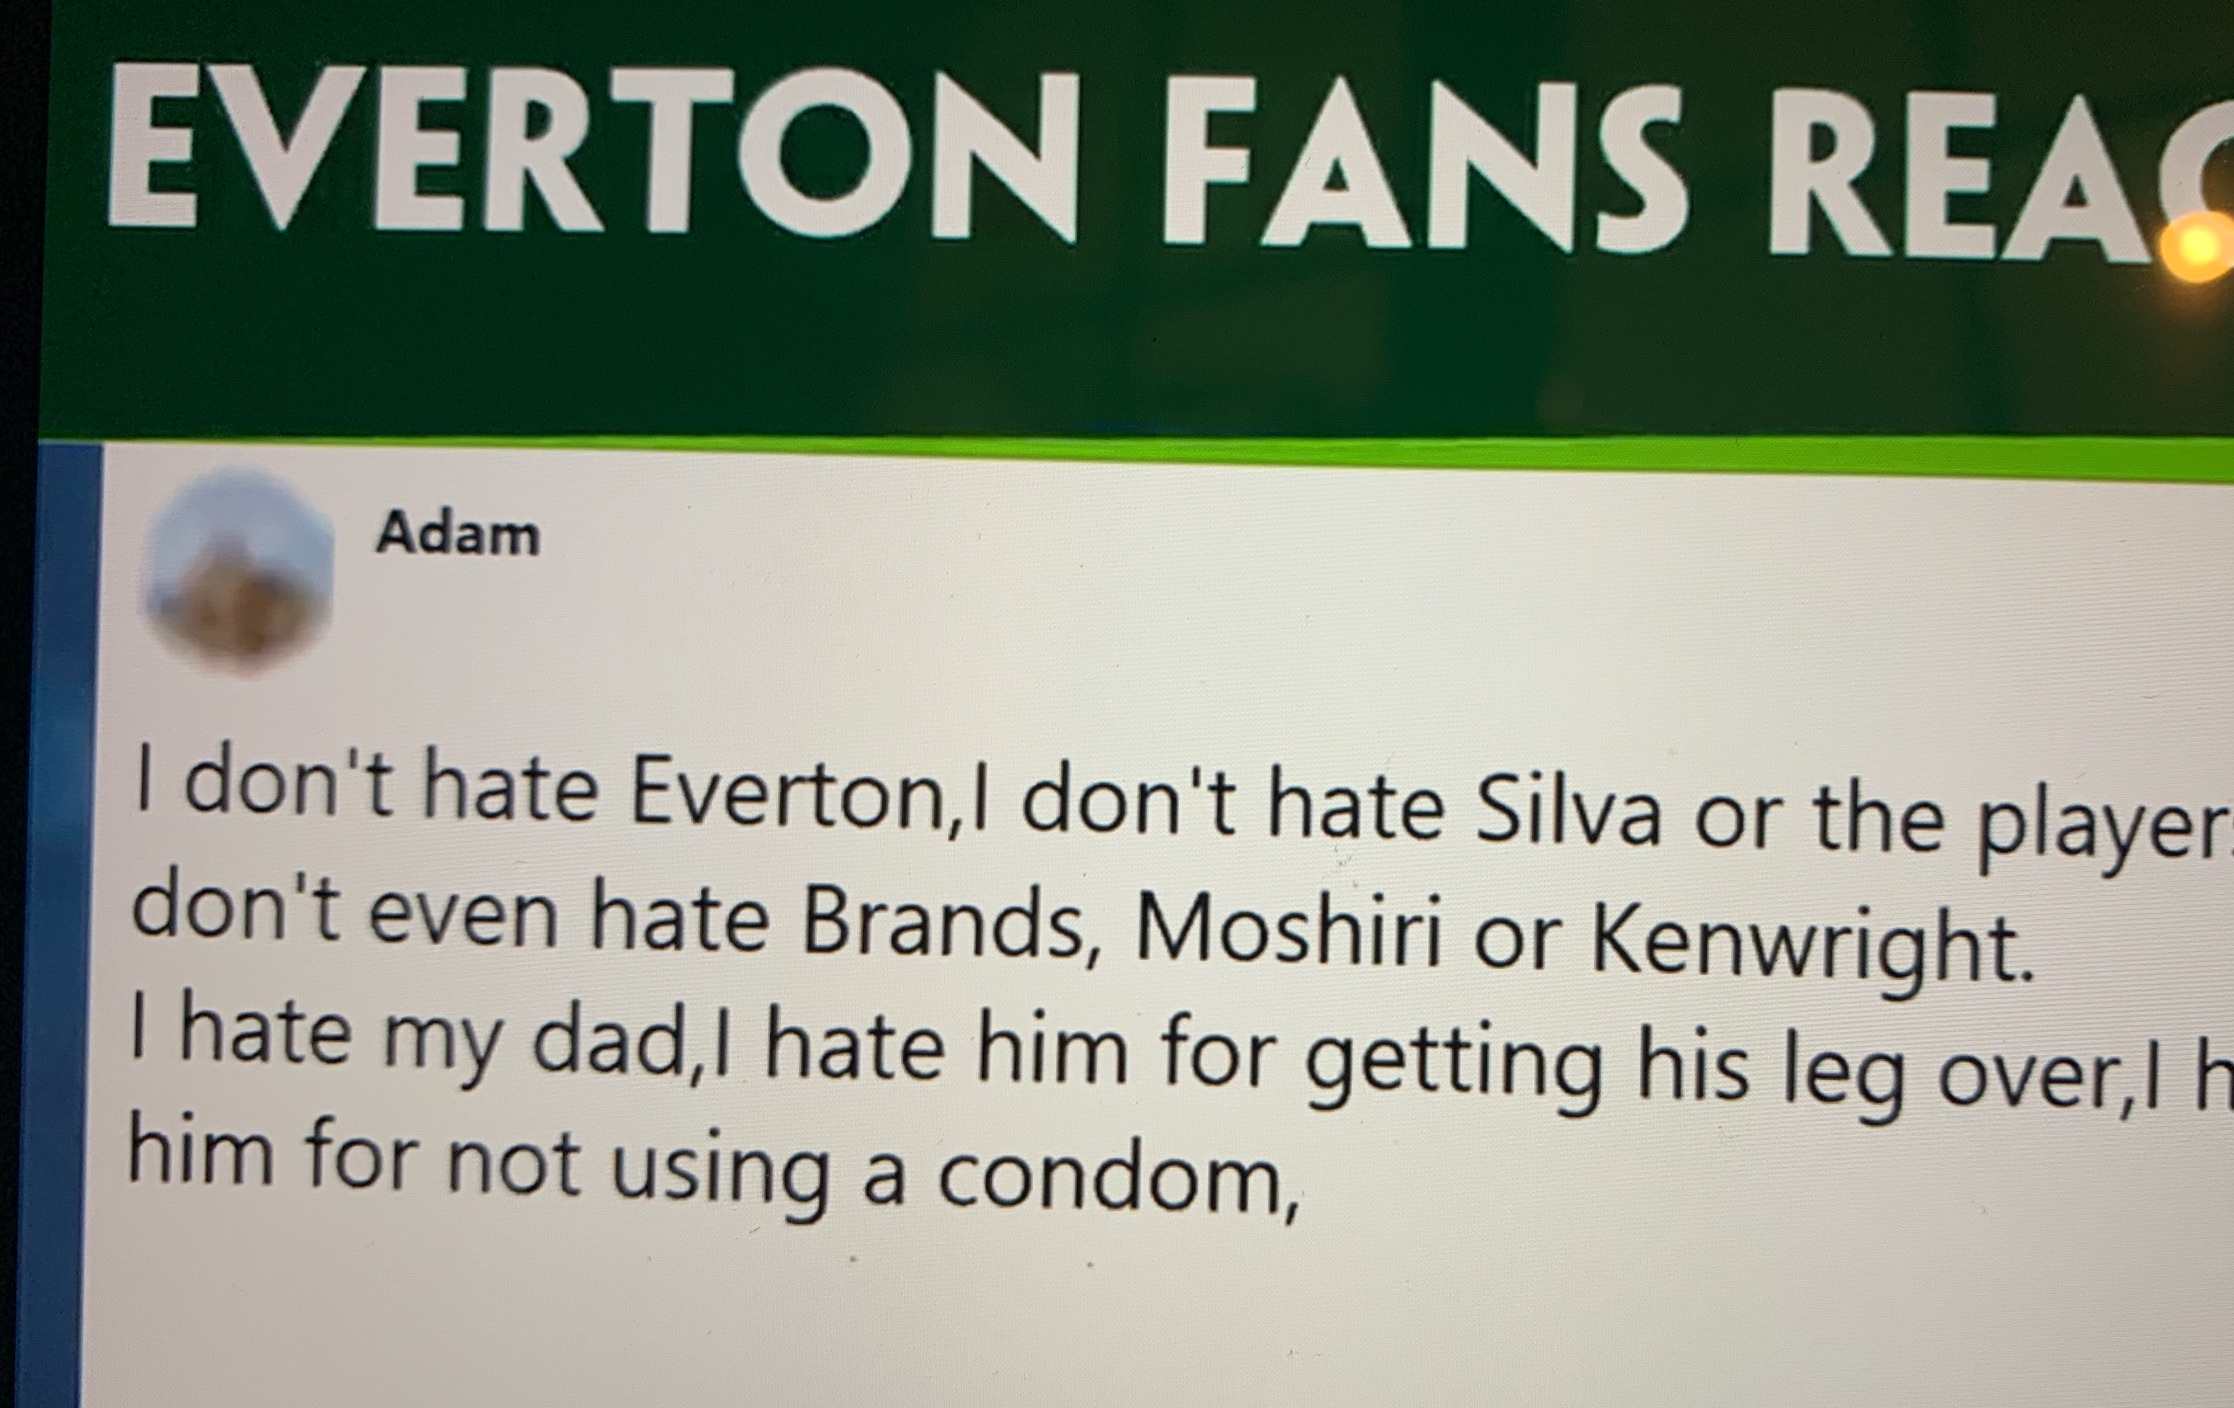 The Official Everton thread - Vol 2  - Page 6 - Football - PistonHeads